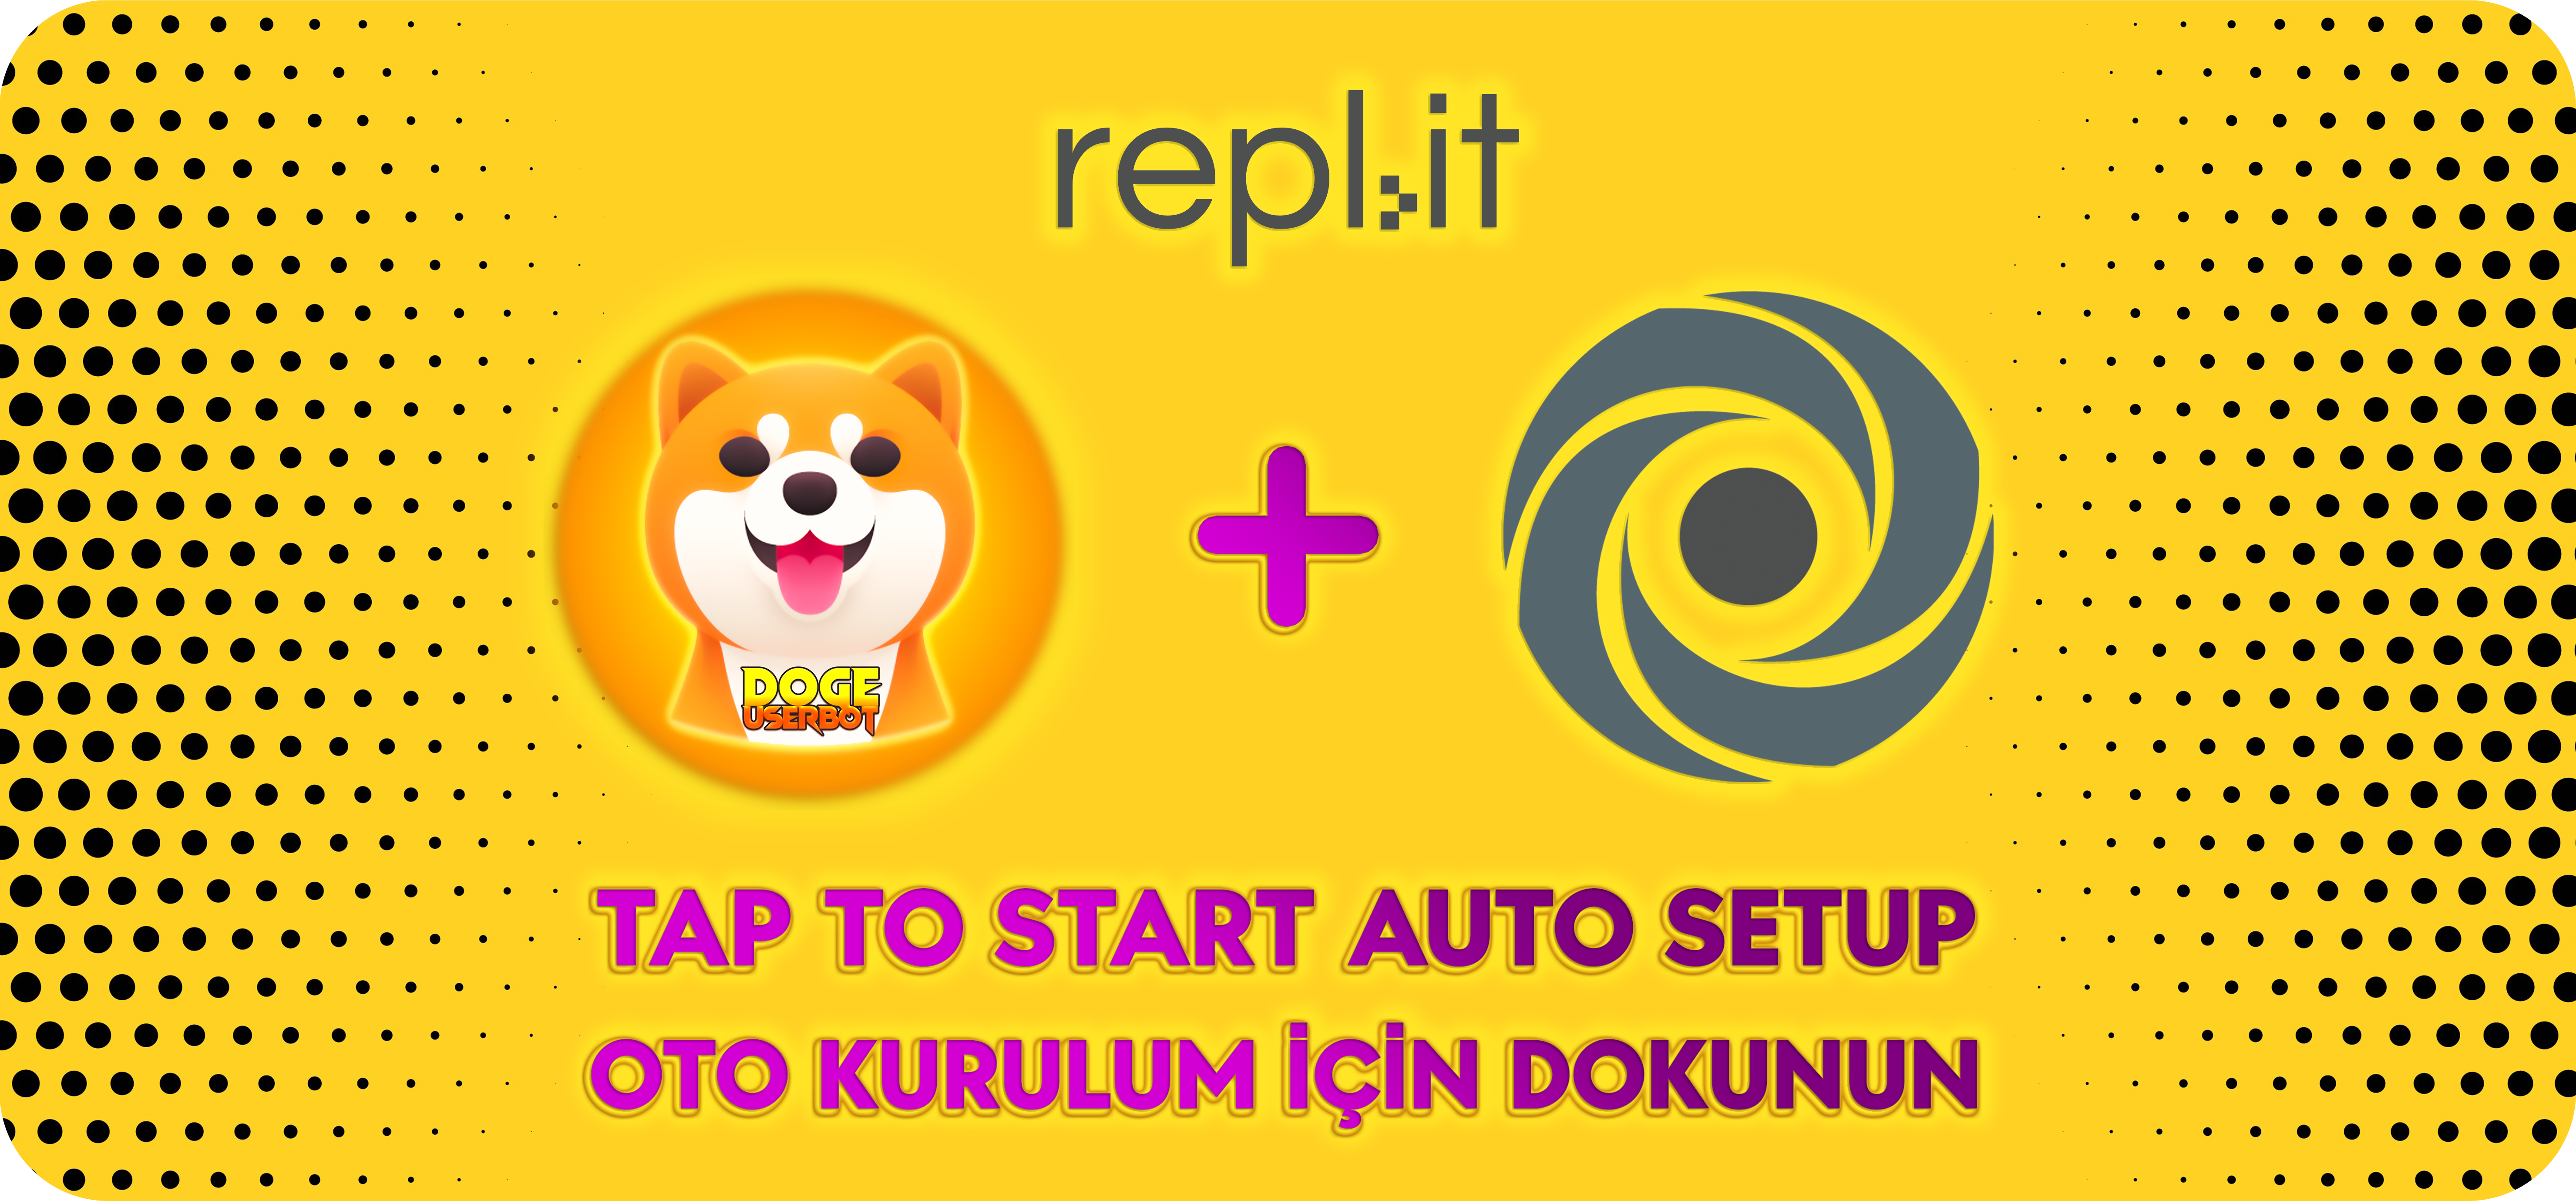 Install from Replit!